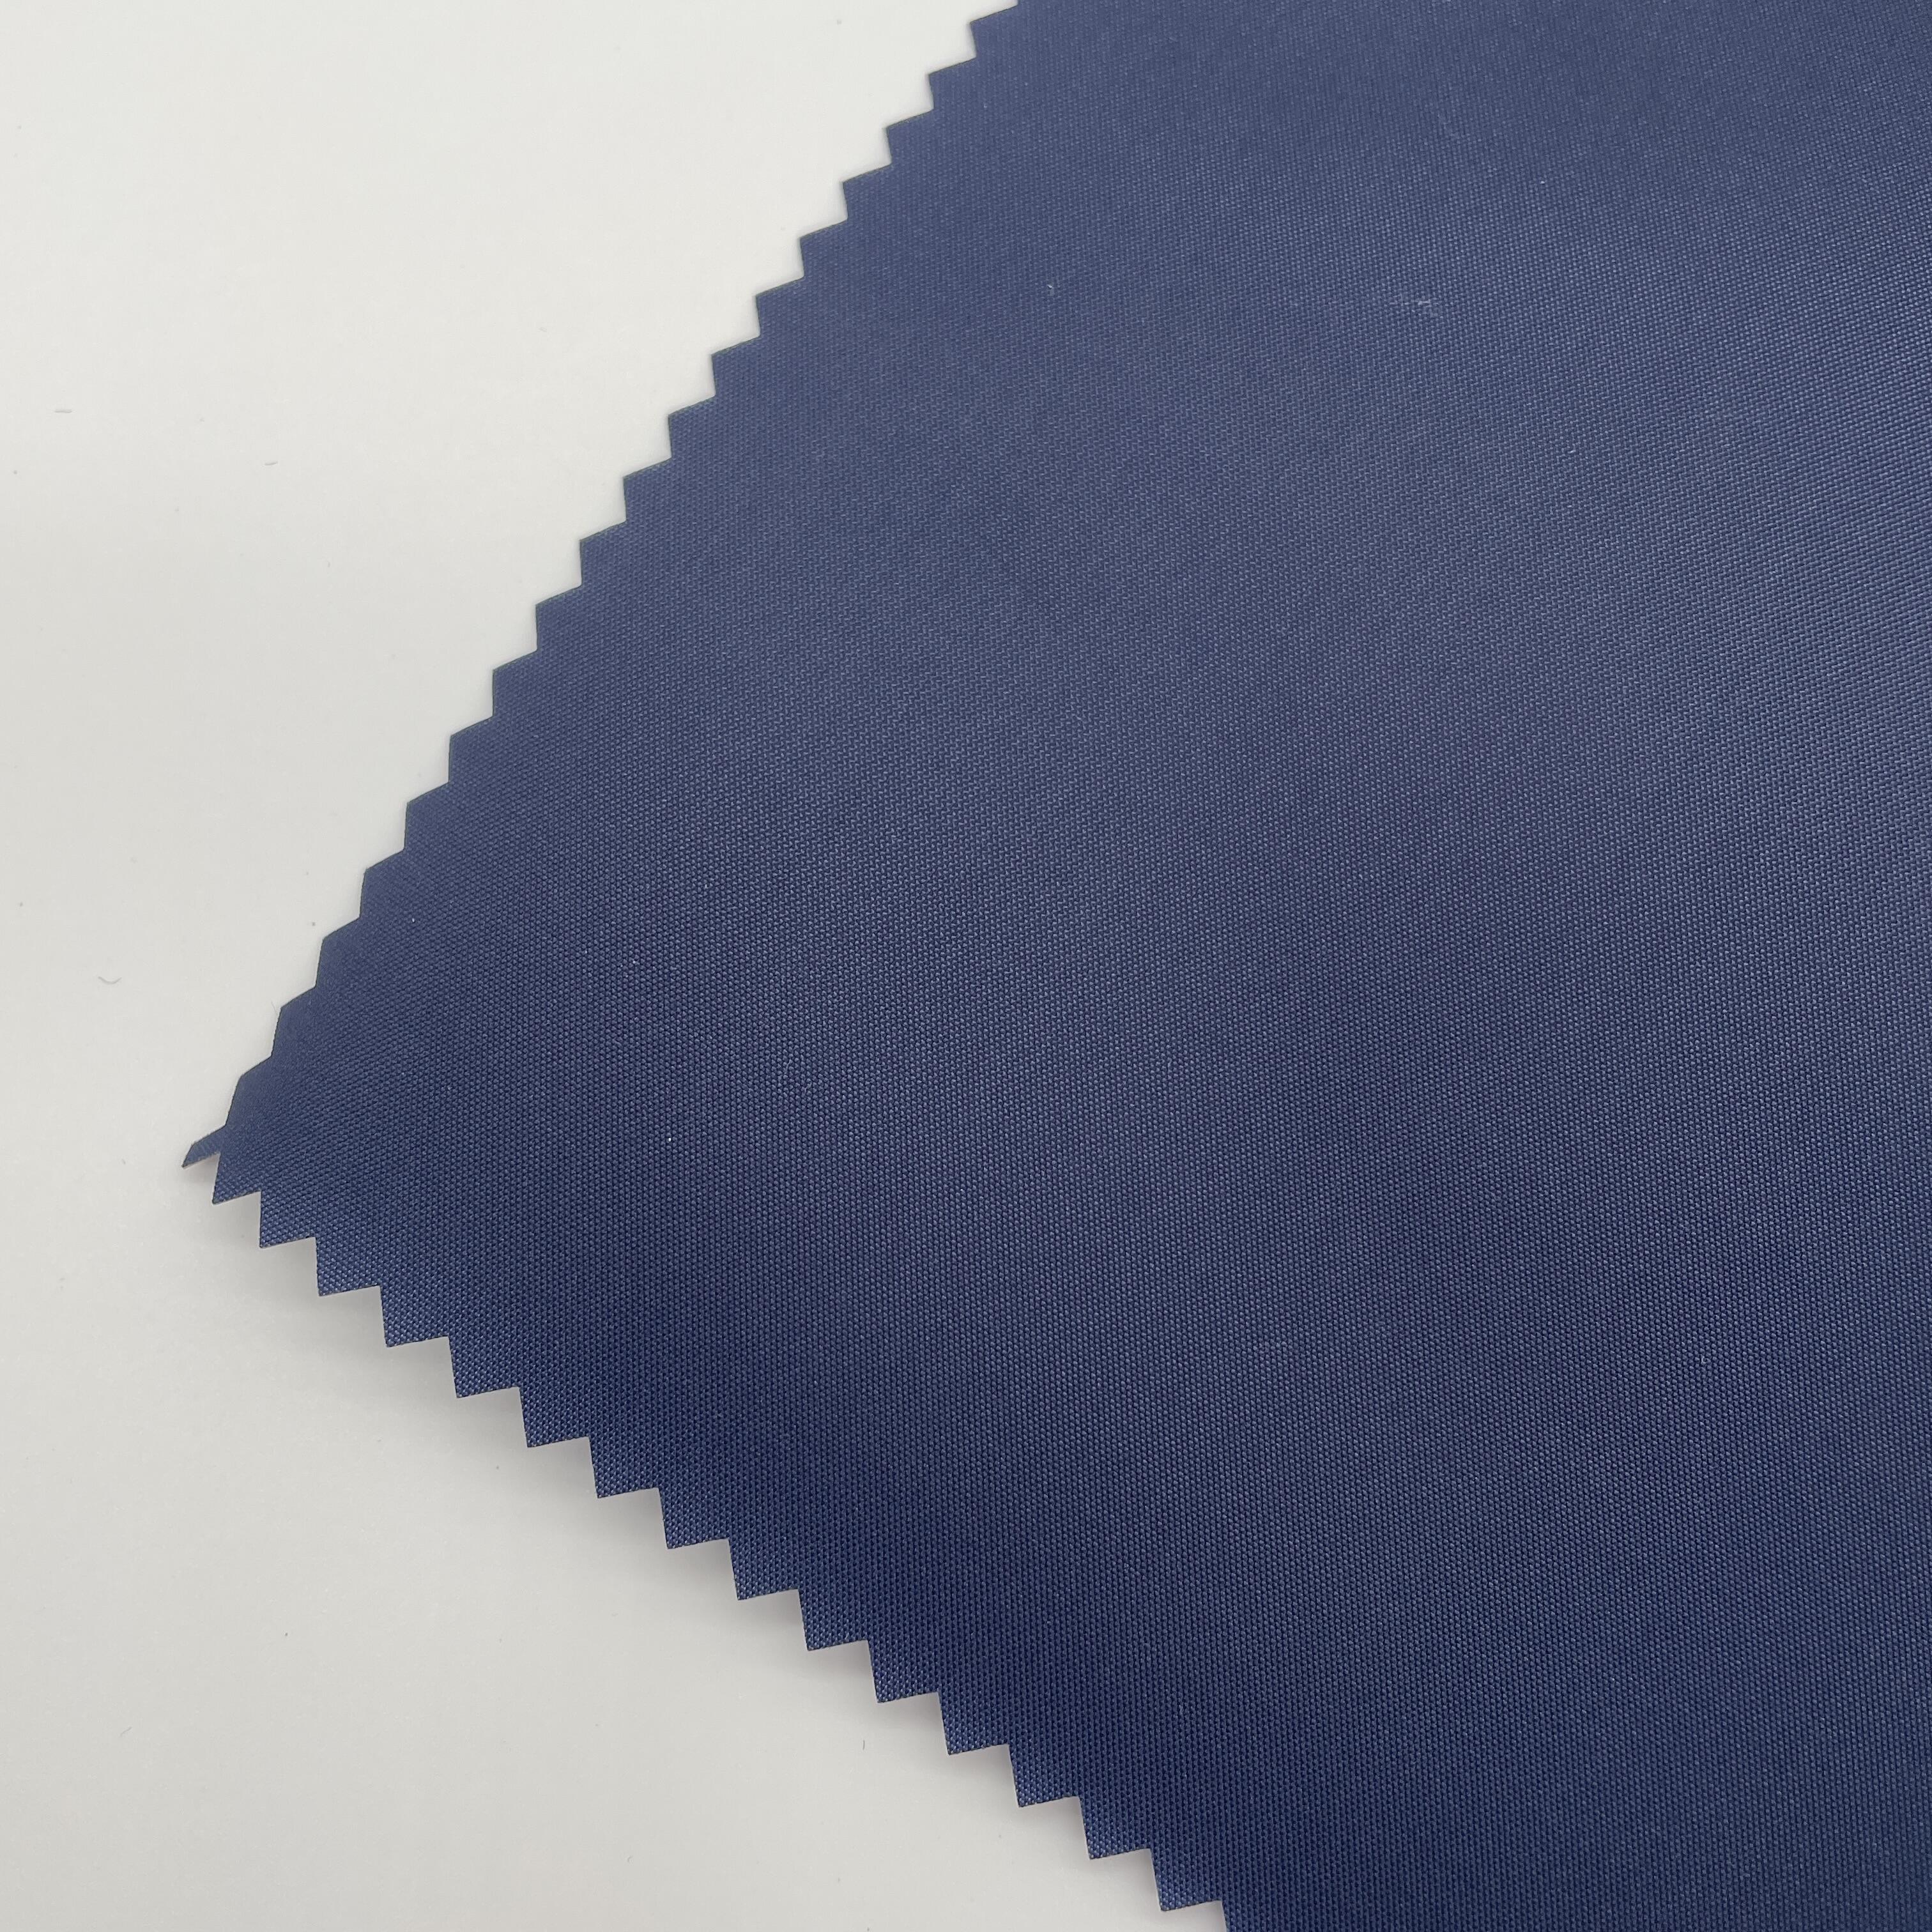 Heat sealable and weldable TPU coated 70D 210T nylon taffeta fabric for Outdoor and Medical Inflatable Products